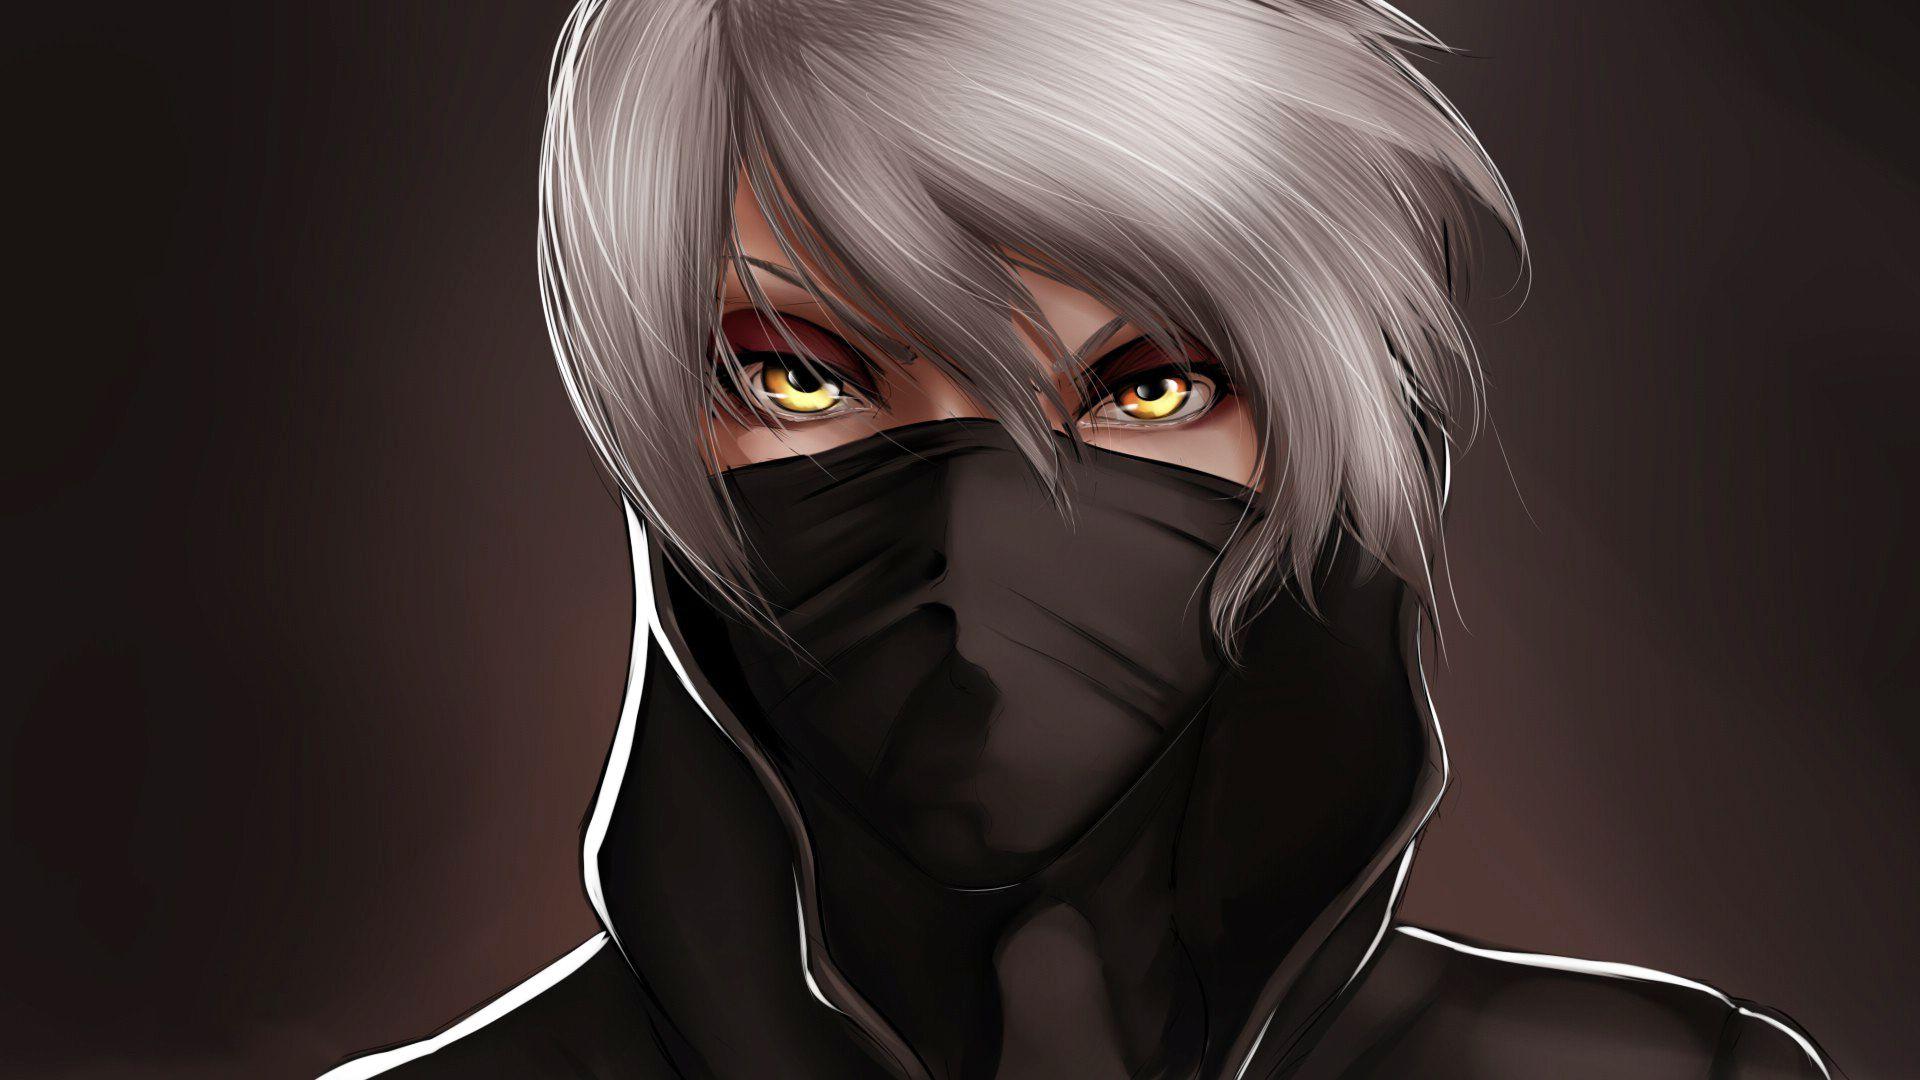 Anime Boy With Mask Wallpapers Top Free Anime Boy With Mask Backgrounds Wallpaperaccess